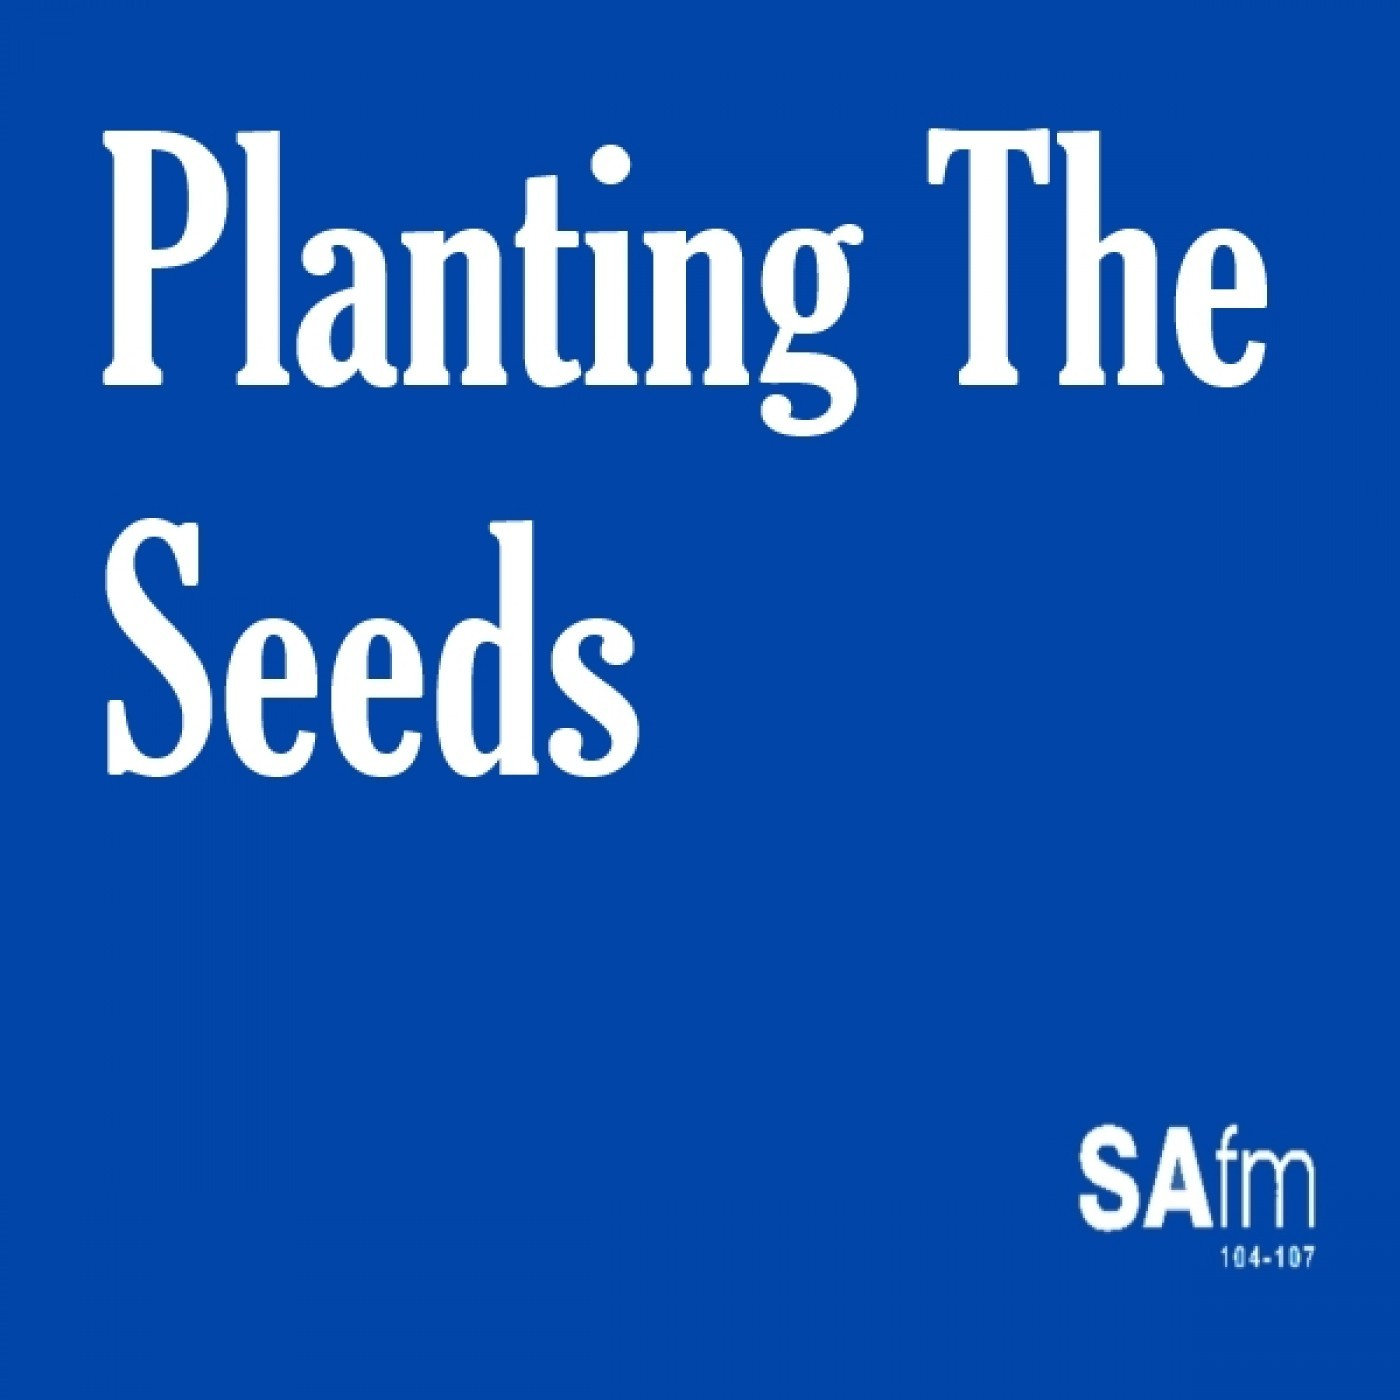 21-03-2019 PLANTING THE SEEDS